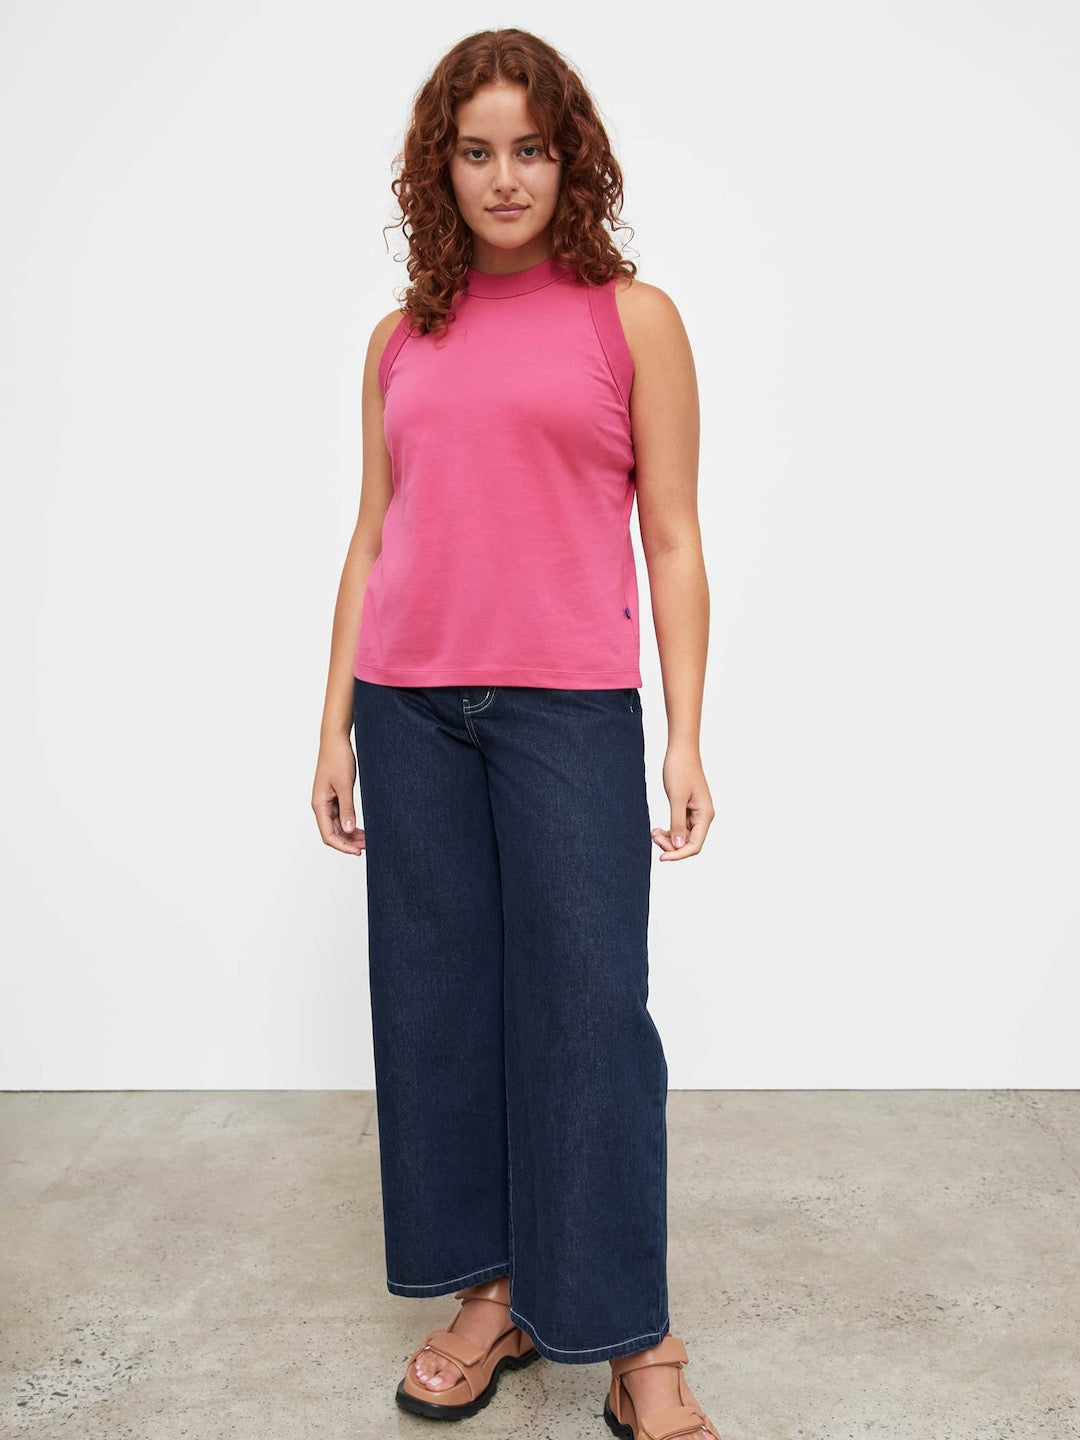 A woman wearing a Kowtow Fuchsia Tank Top and blue jeans.